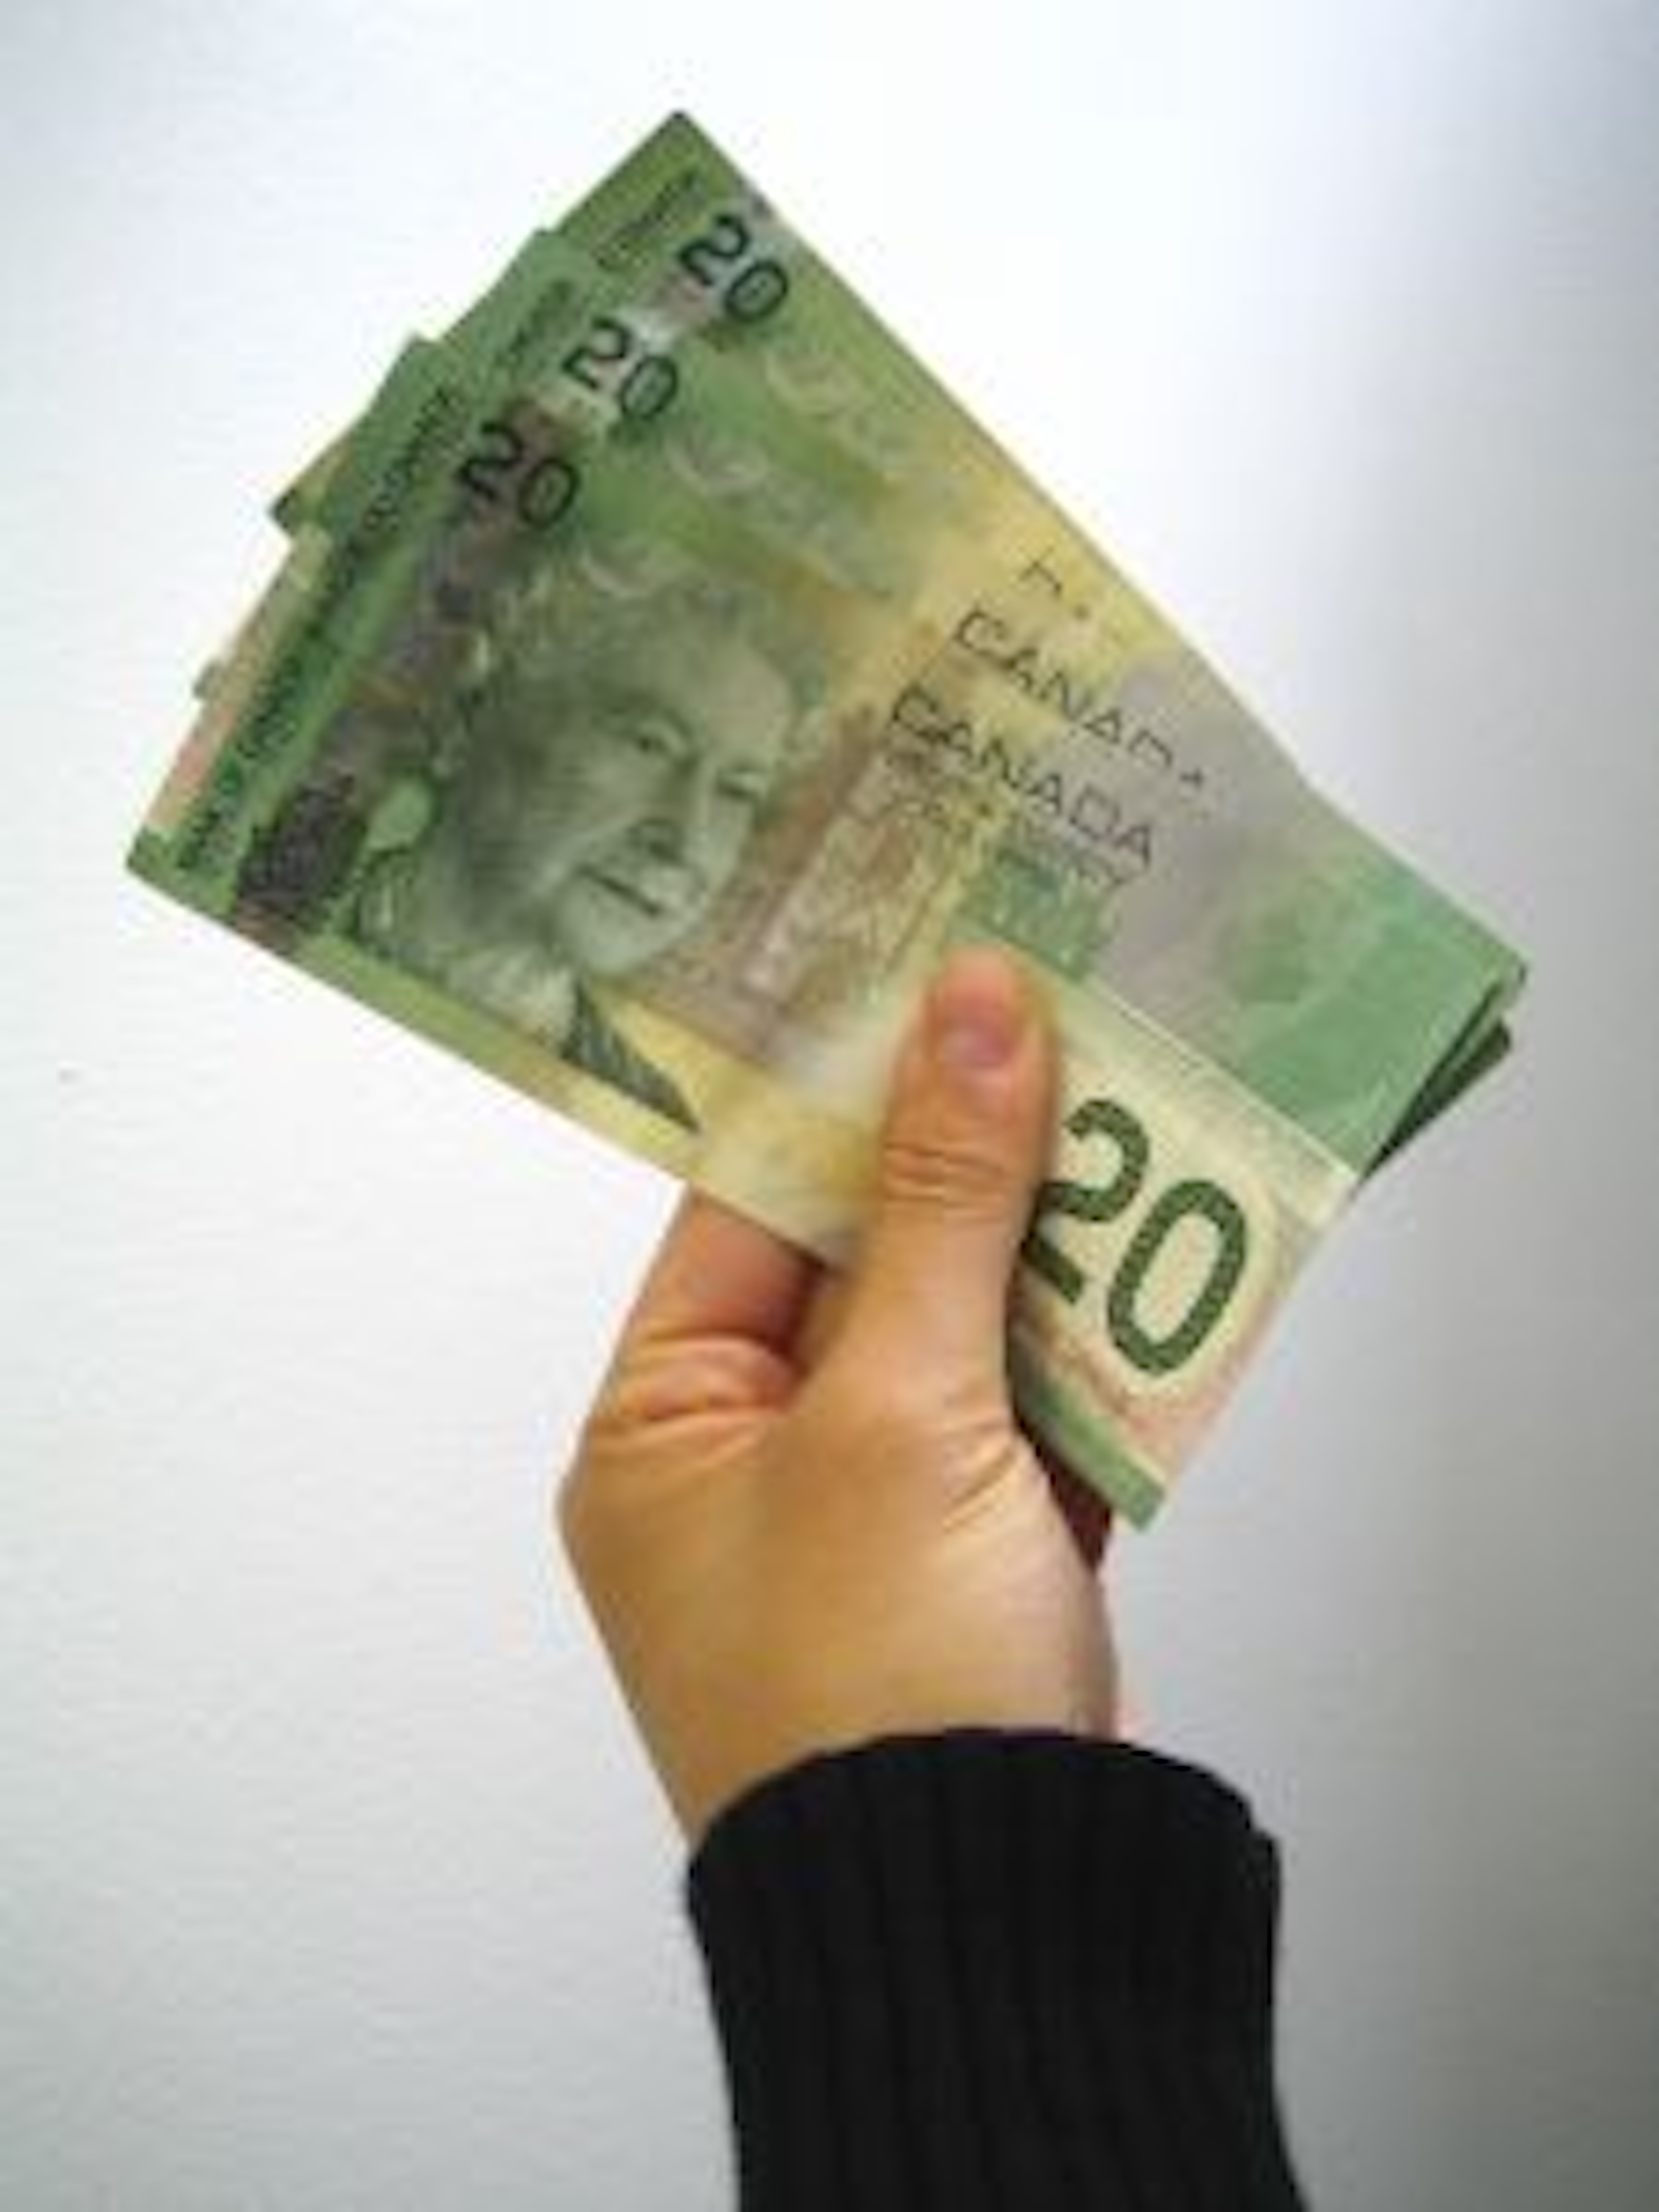 Canadian payroll record keeping requirements for paying employees in cash